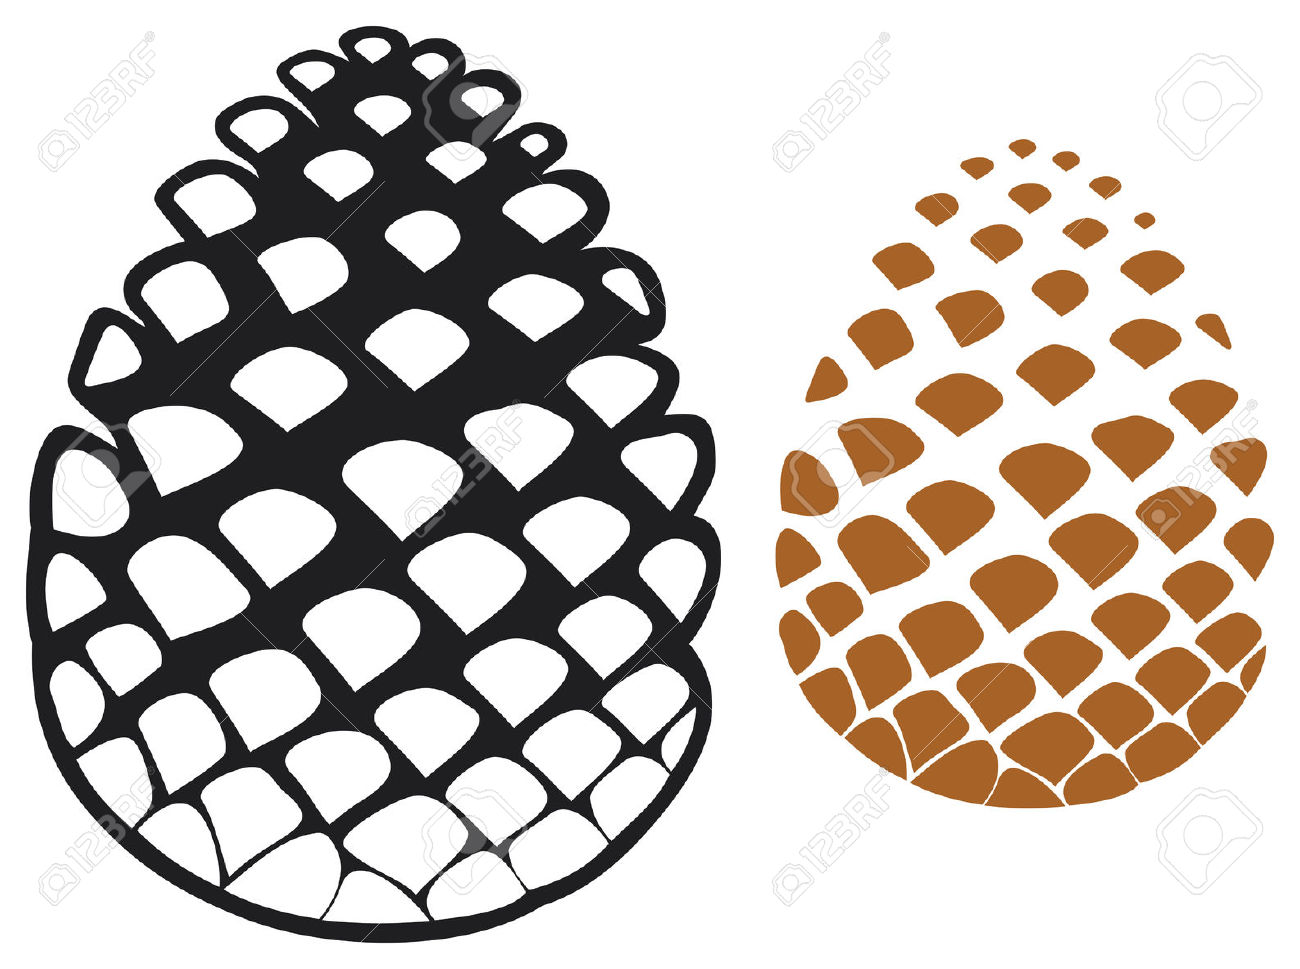 Pine Cone clipart #13, Download drawings